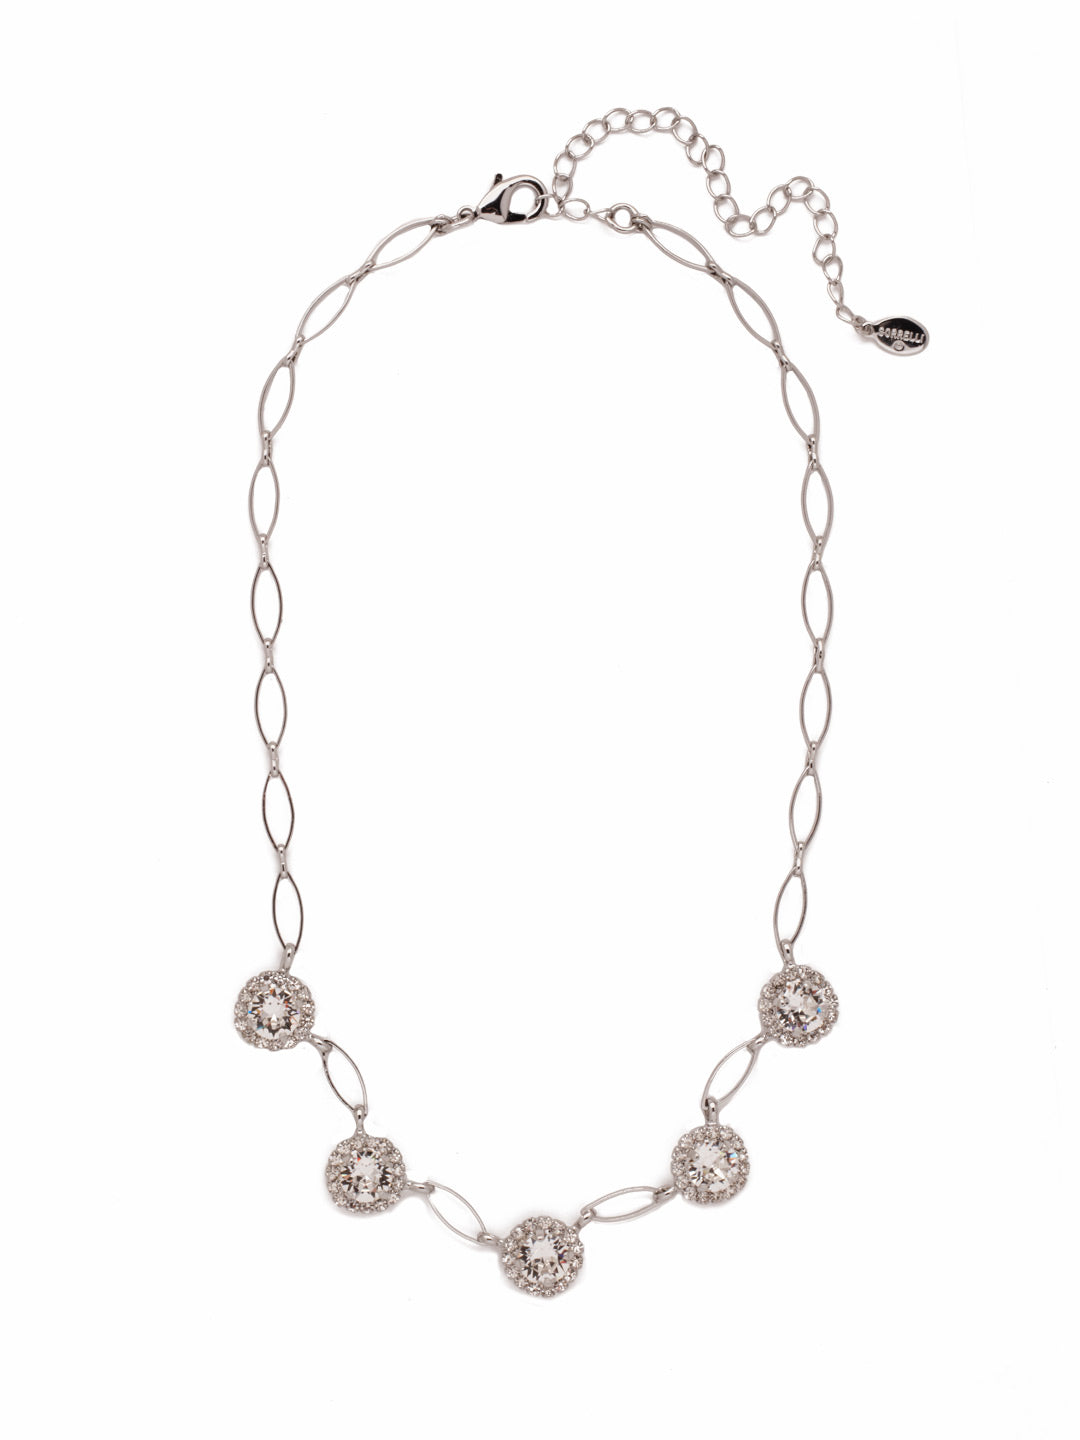 Haute Halo Oval Tennis Necklace - NEY12PDCRY - <p>The Haute Halo Oval Tennis Necklace combines halo set round crystals and small oval hoops, linked together, creating a stunning statement piece. From Sorrelli's Crystal collection in our Palladium finish.</p>